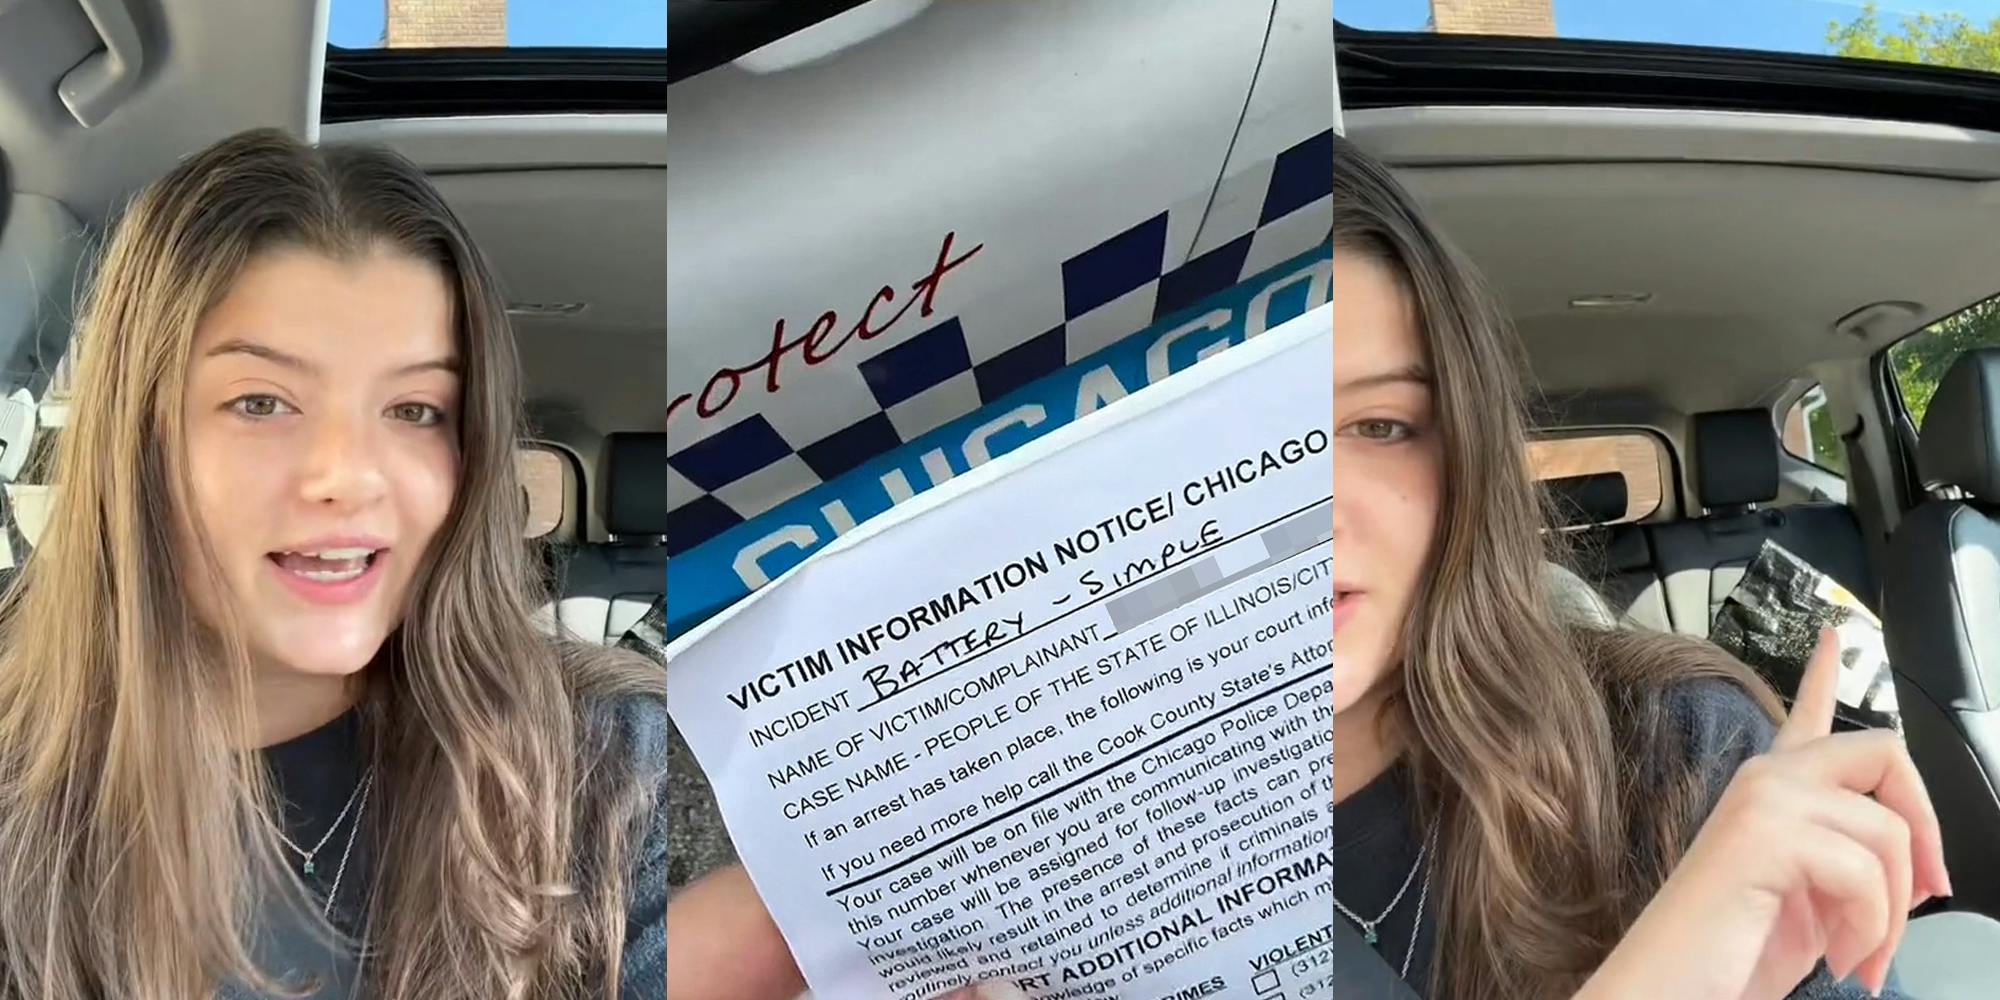 woman speaking in car (l) Victim Information Notice paper "Incident Battery- Simple" (c) woman in car pointing to laundry in back seat (r)